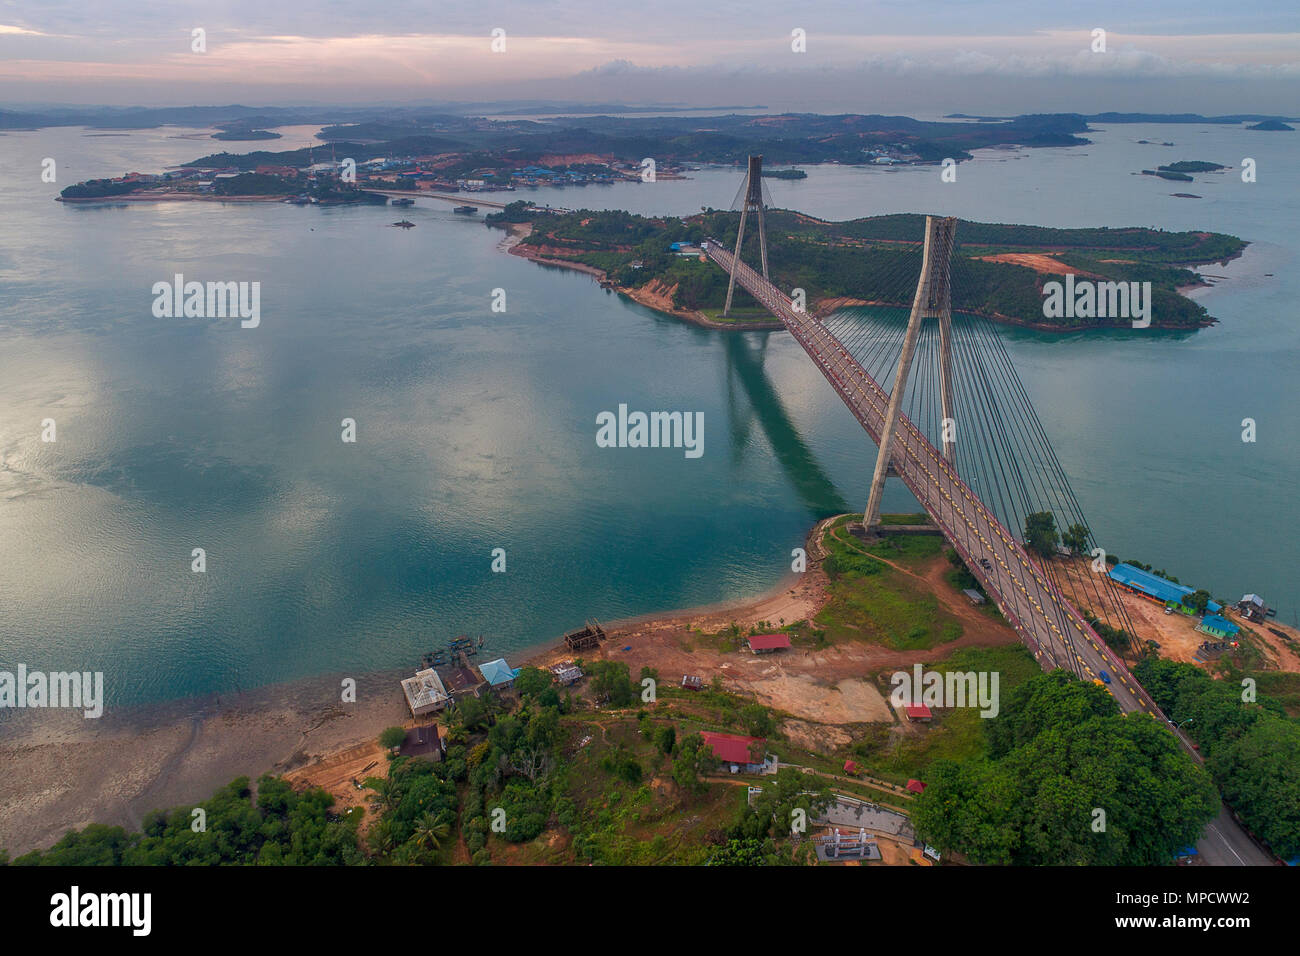 Aerial view of Barelang Bridge a chain of six bridges of various types that connect the islands of Batam at sunrise, Indonesia Stock Photo